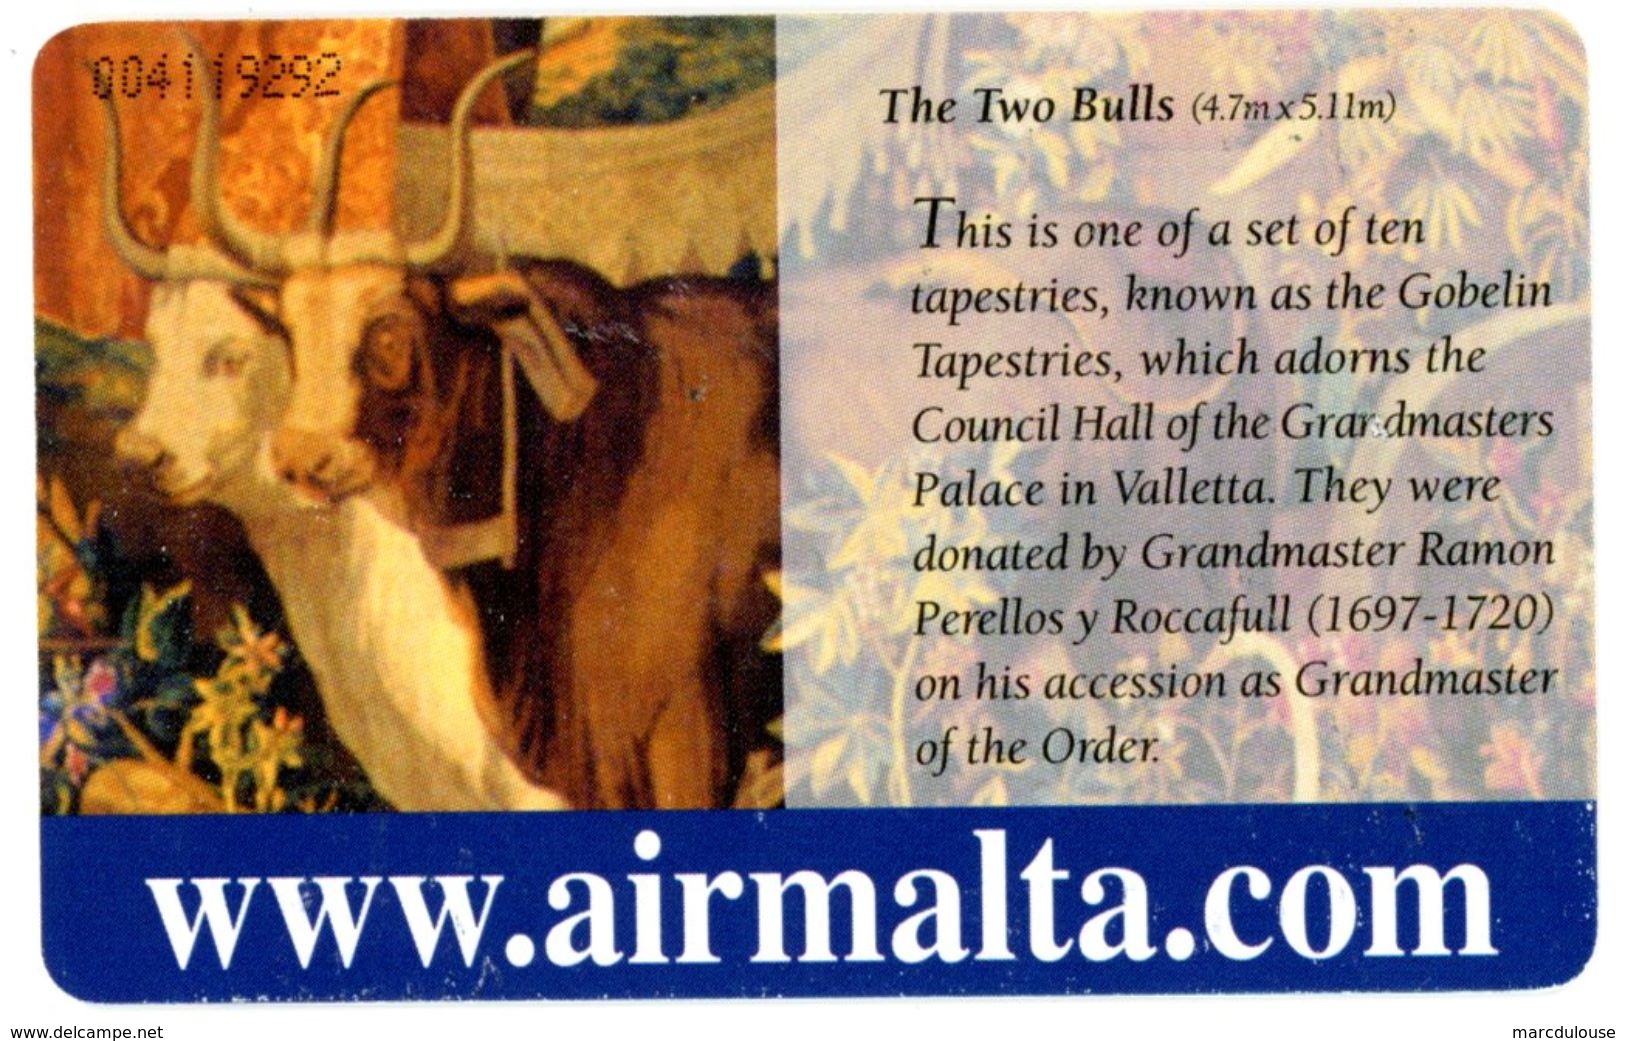 Malta. Maltacom. Airmalta.com. The Two Bulls. This Is One Of A Set Of Ten Tapestries, Known As The Gobelin Tapestries... - Malte